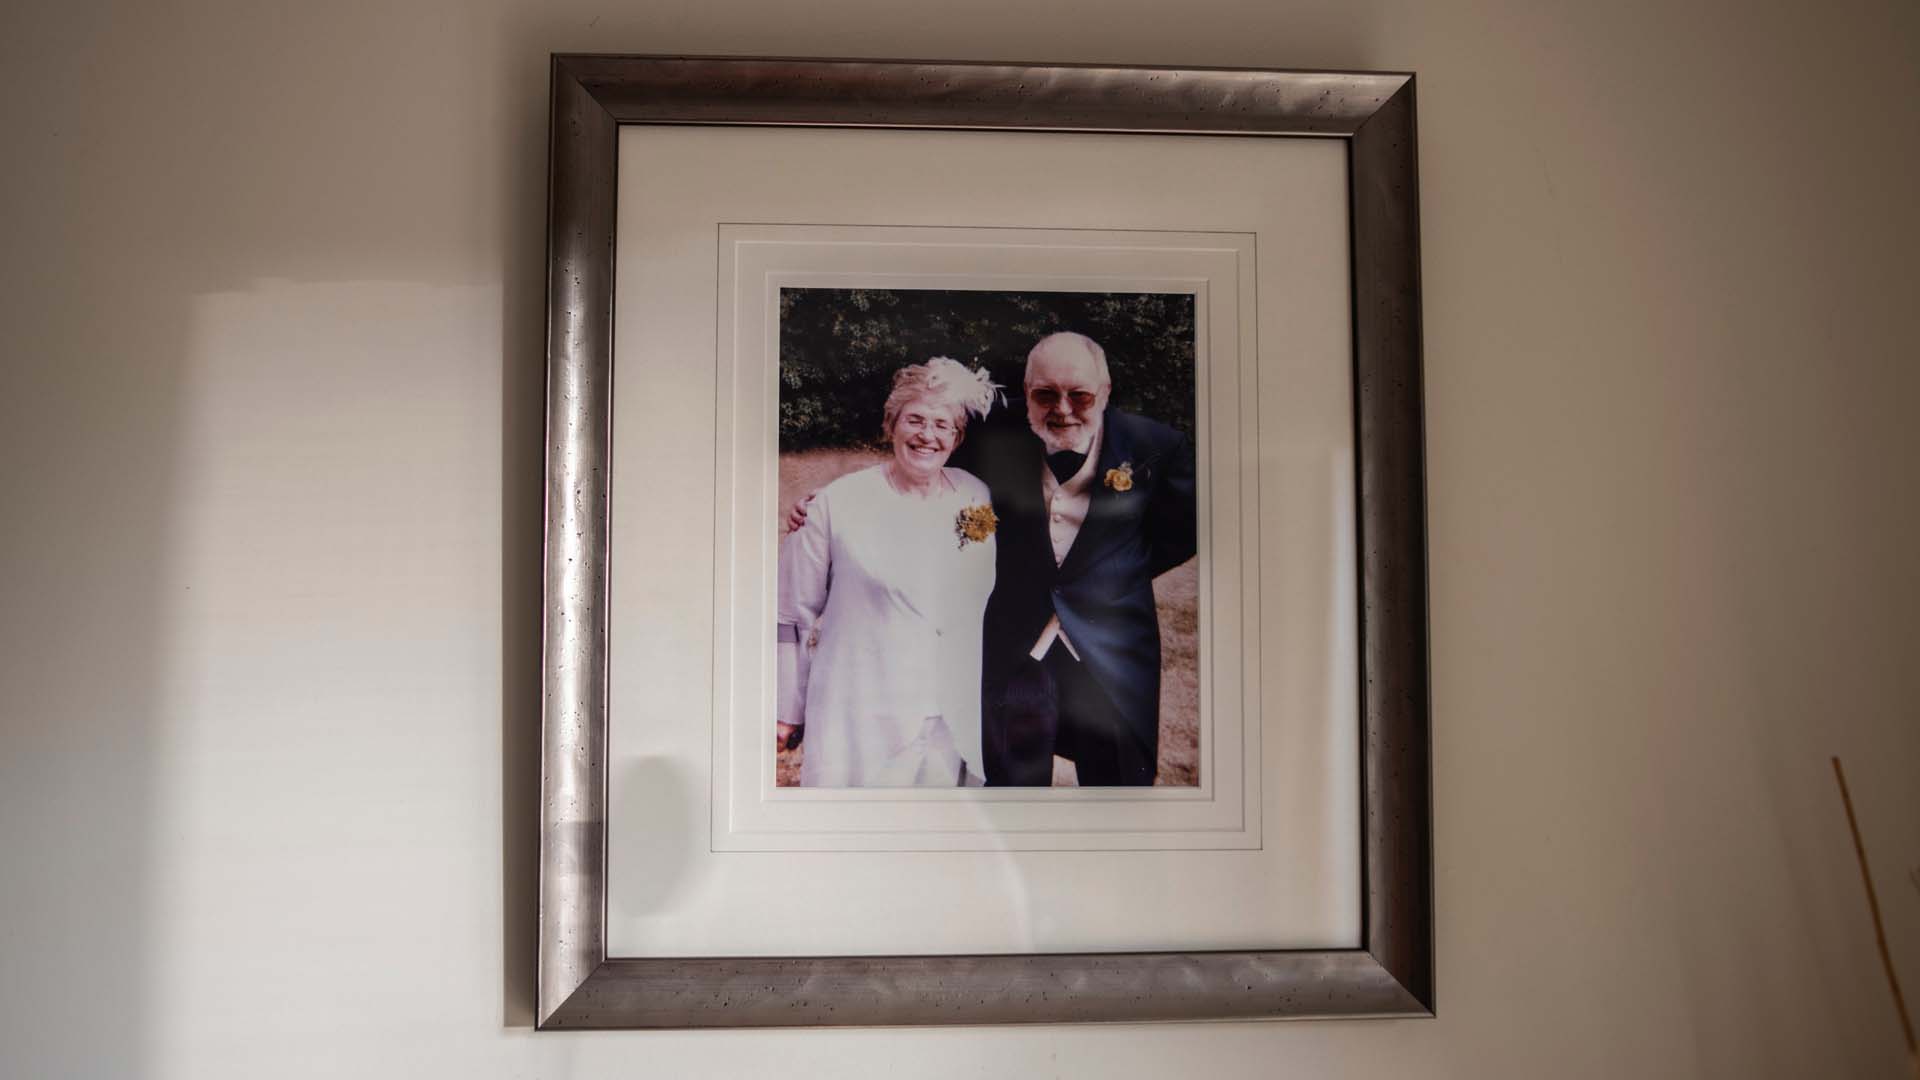 A framed photgraph on the wall of Sheila and Jack